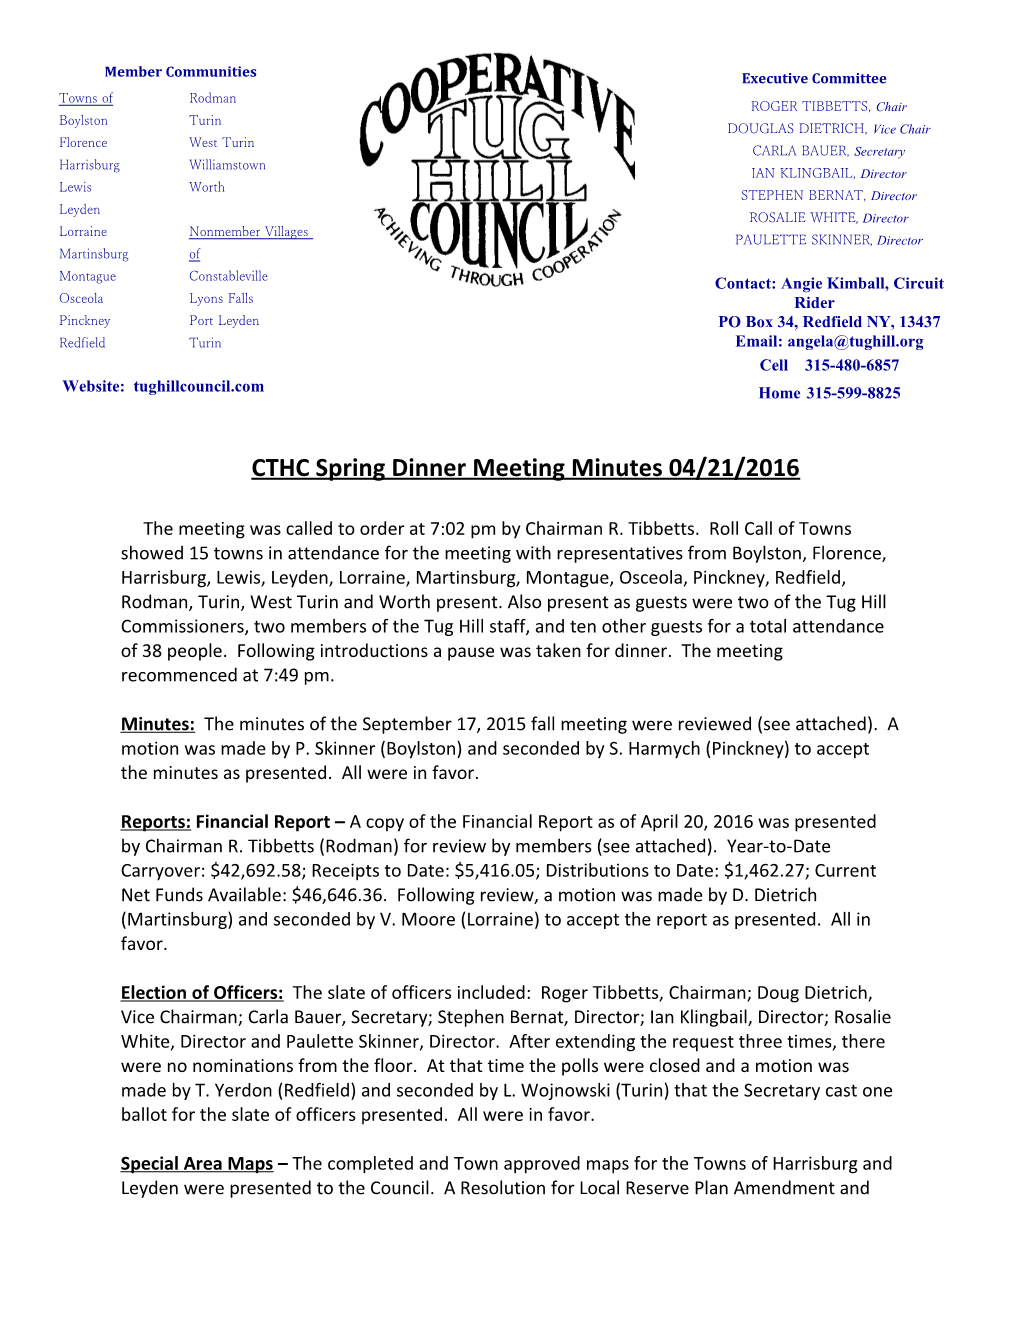 CTHC Spring Dinner Meeting Minutes 04/21/2016